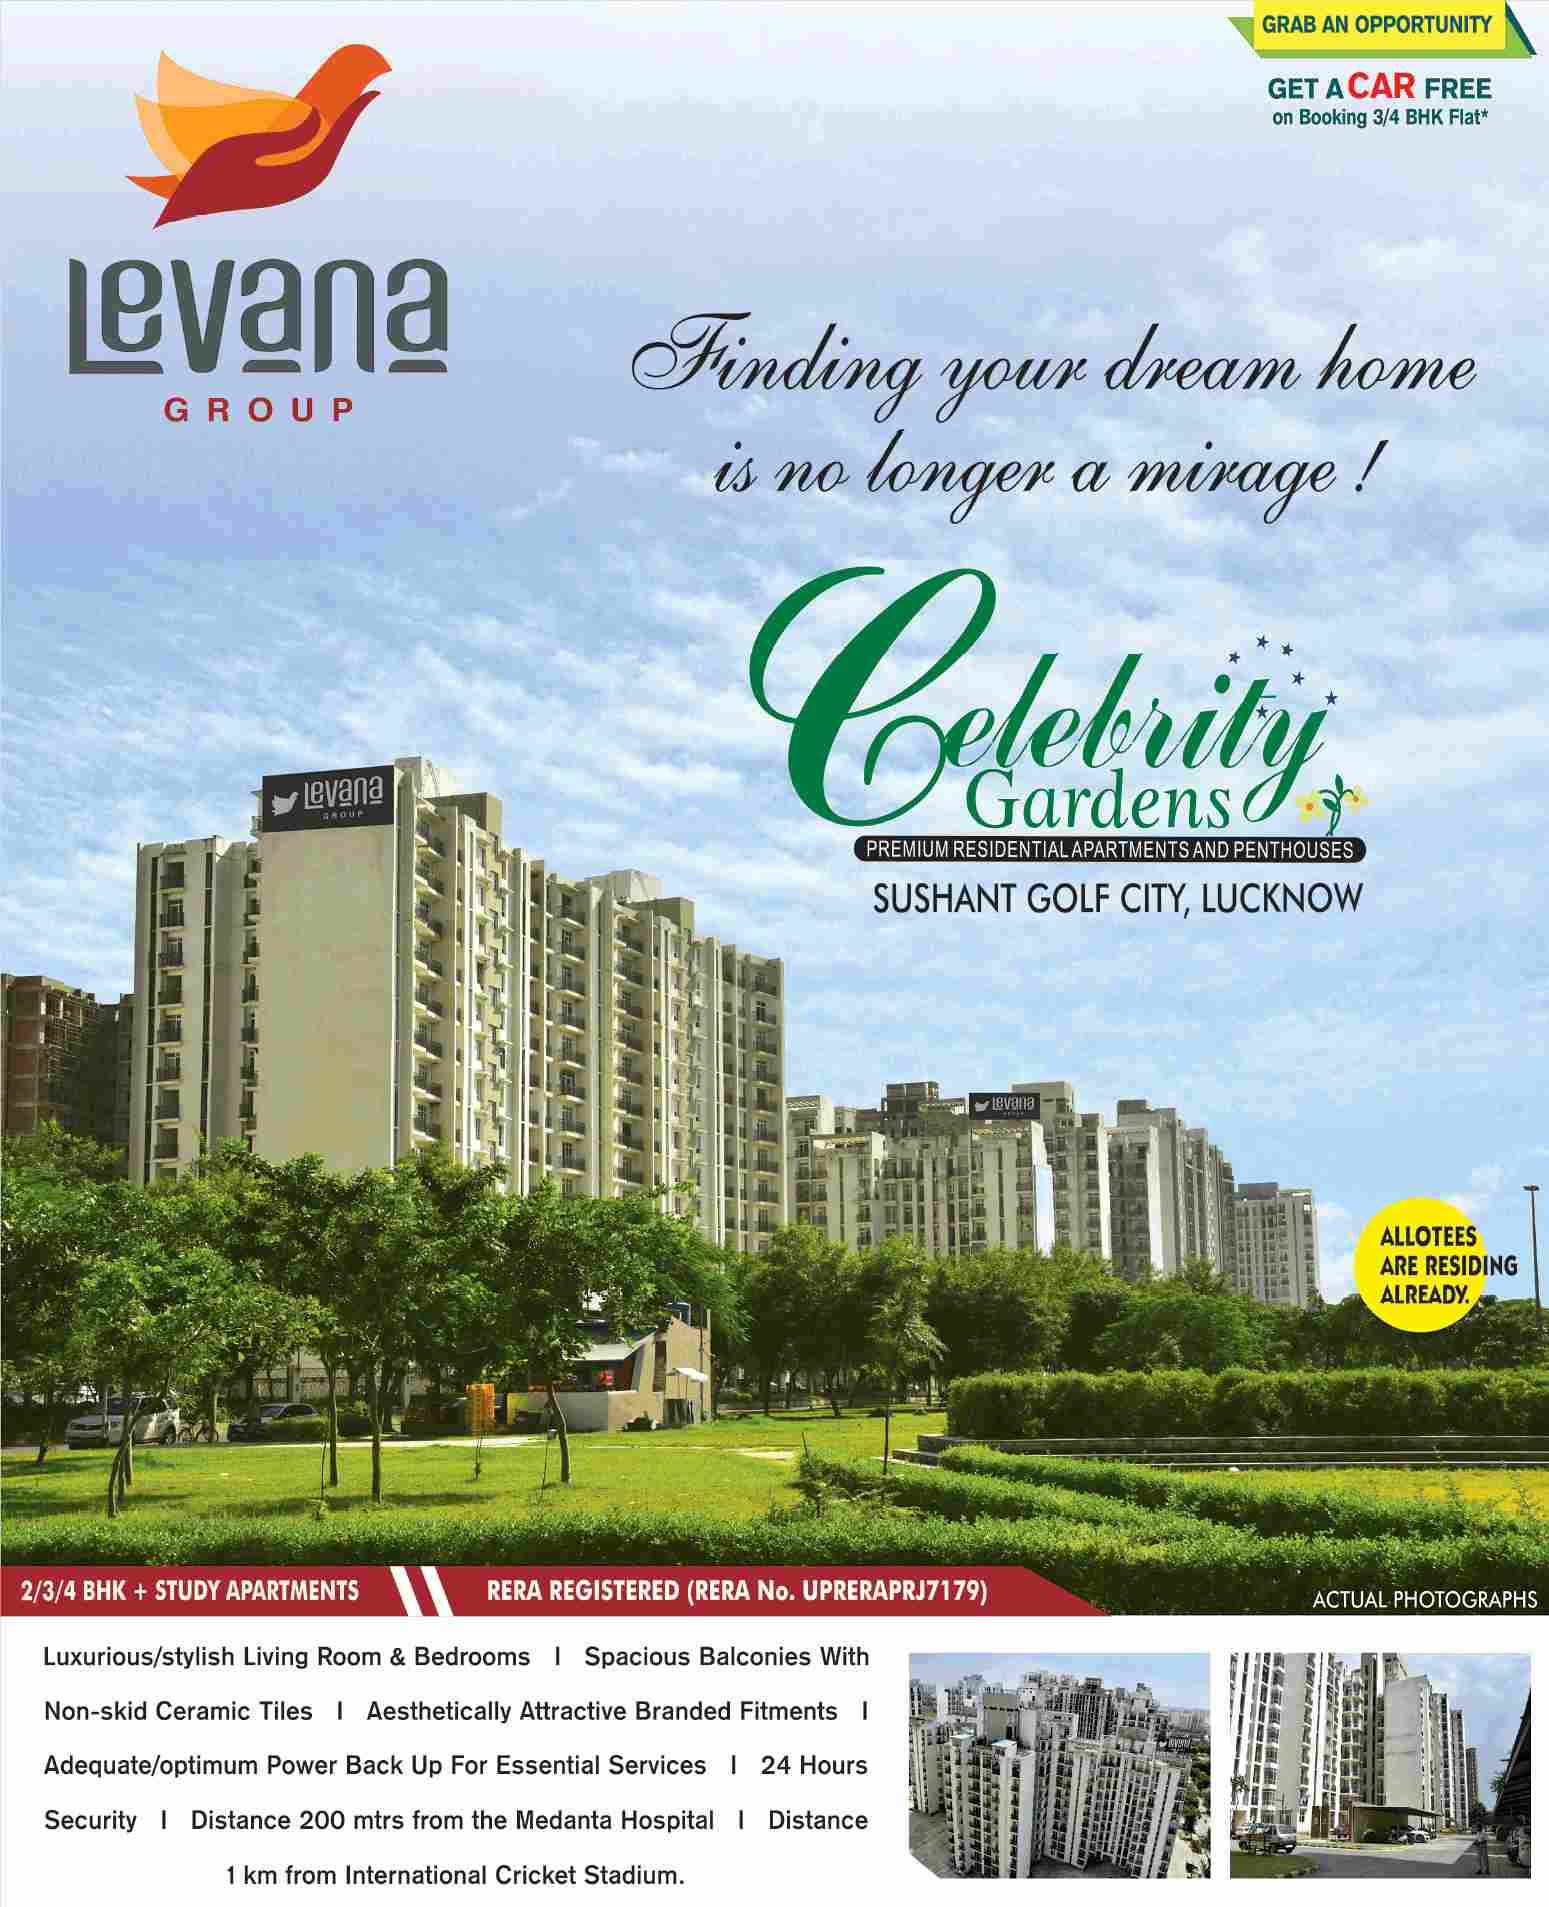 Get a car free on booking 3 & 4 BHK flats at Levana Celebrity Gardens in Lucknow Update